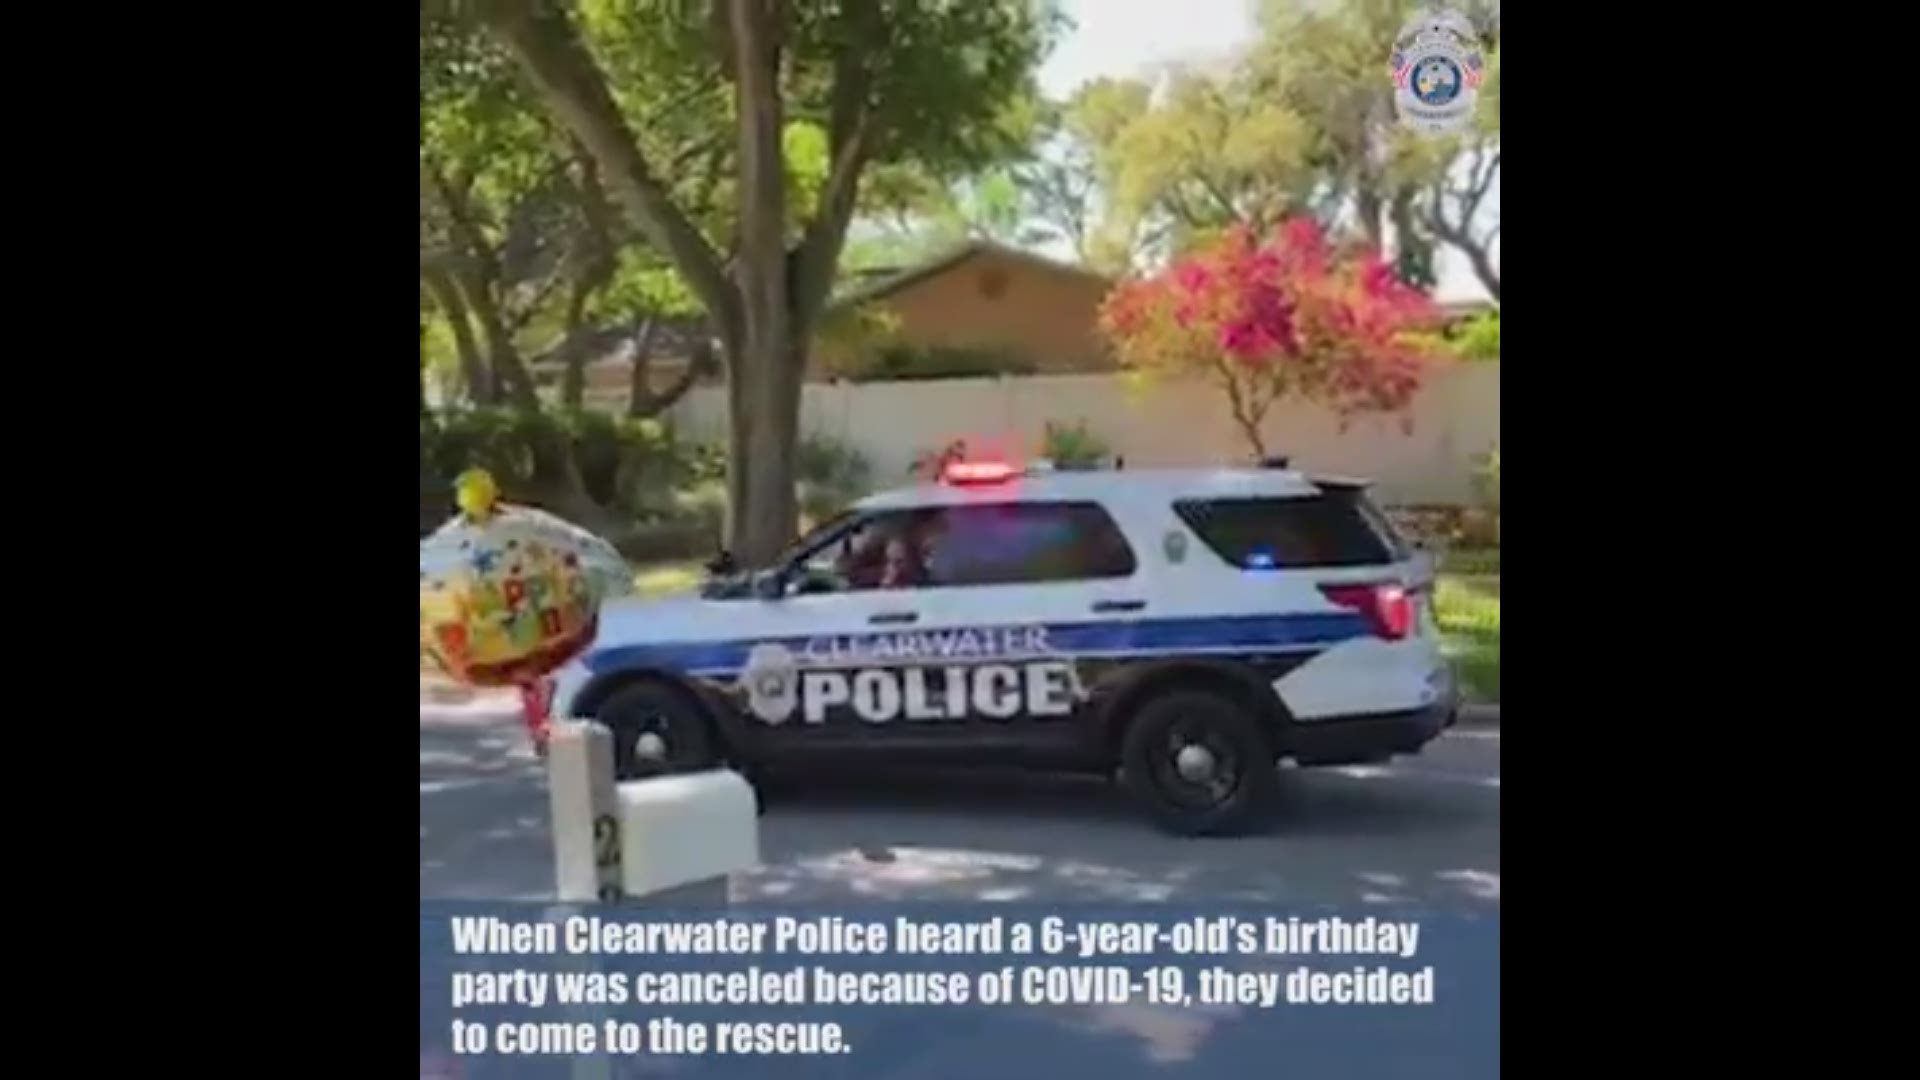 The Clearwater Police Department helped 6-year-old Christian celebrate his birthday during the COVID-19 pandemic.